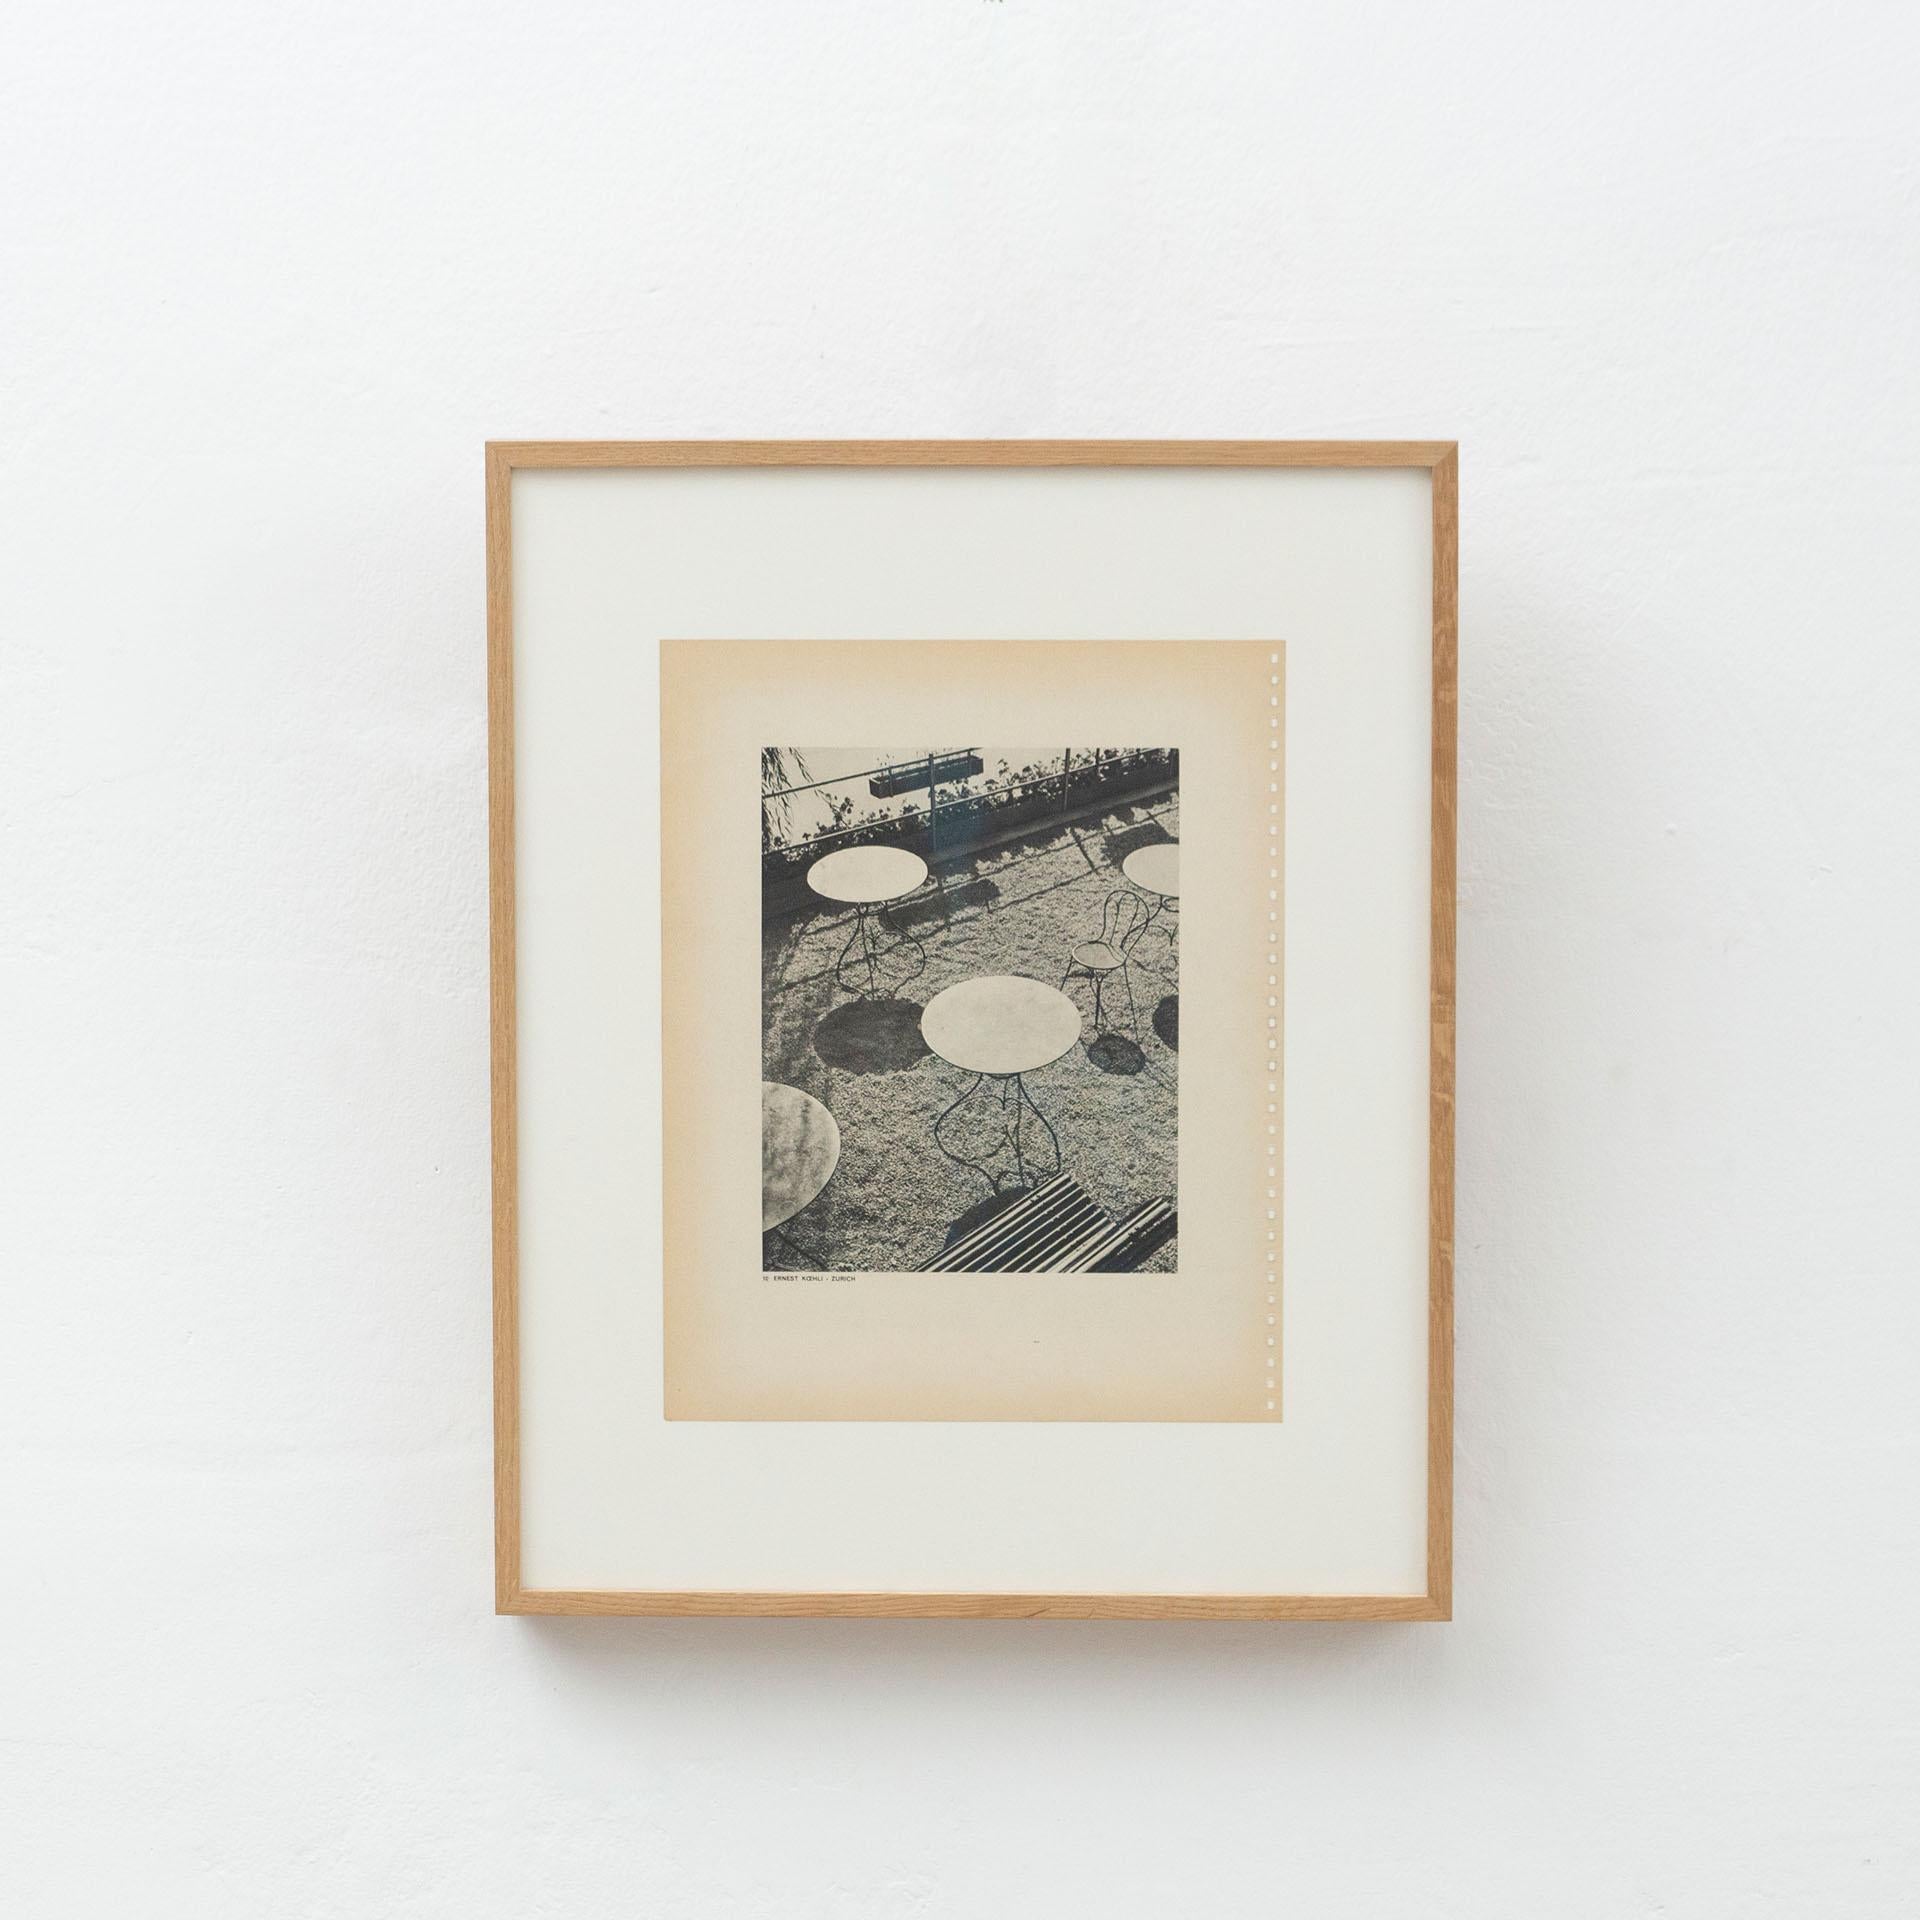 Vintage photo gravure 'Picnic Tables' by the photographer Ernest Koehli.
Wood frame with passepartout and high quality museum's glass.

In original condition, with minor wear consistent with age and use, preserving a beautiful patina.